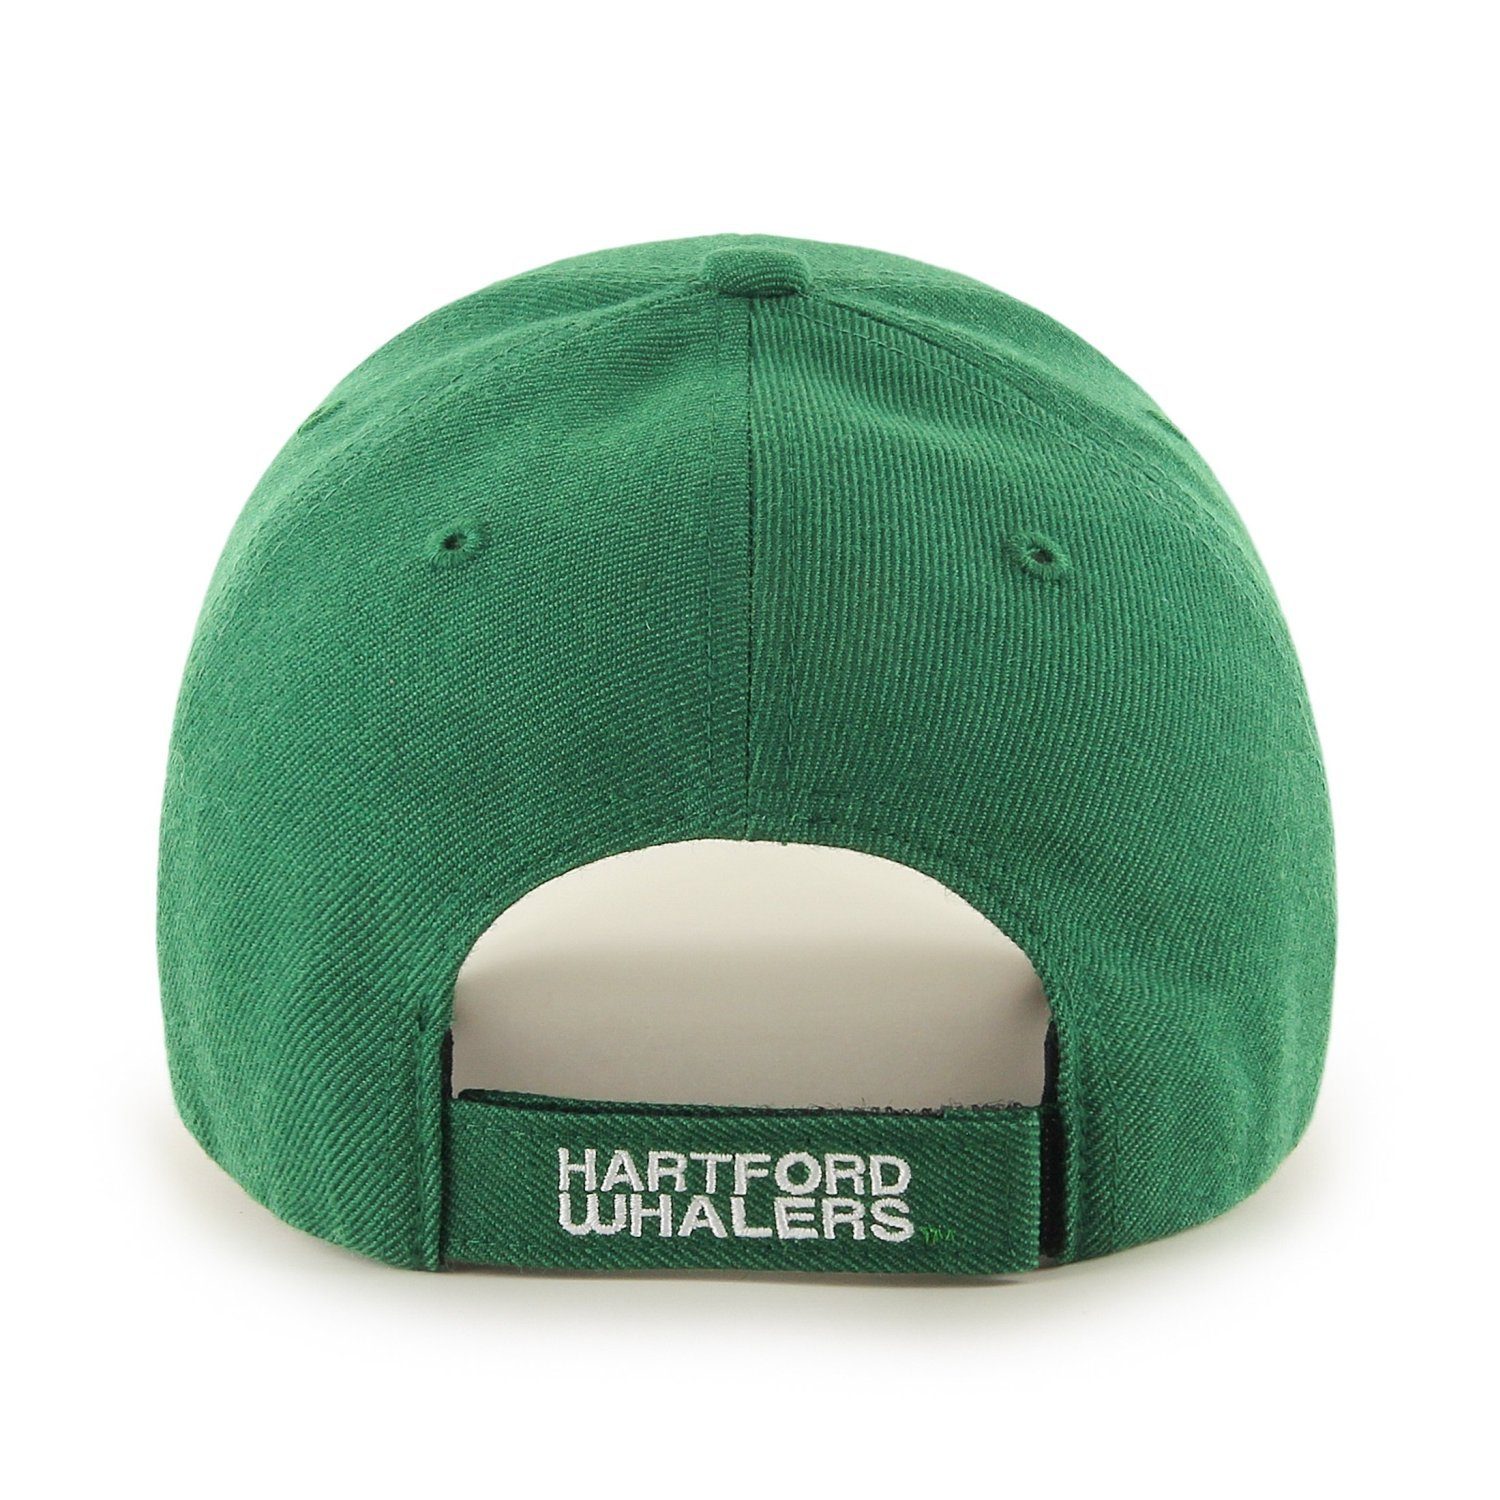 Brand Fit Relaxed Hartford NHL Trucker Whalers Cap '47